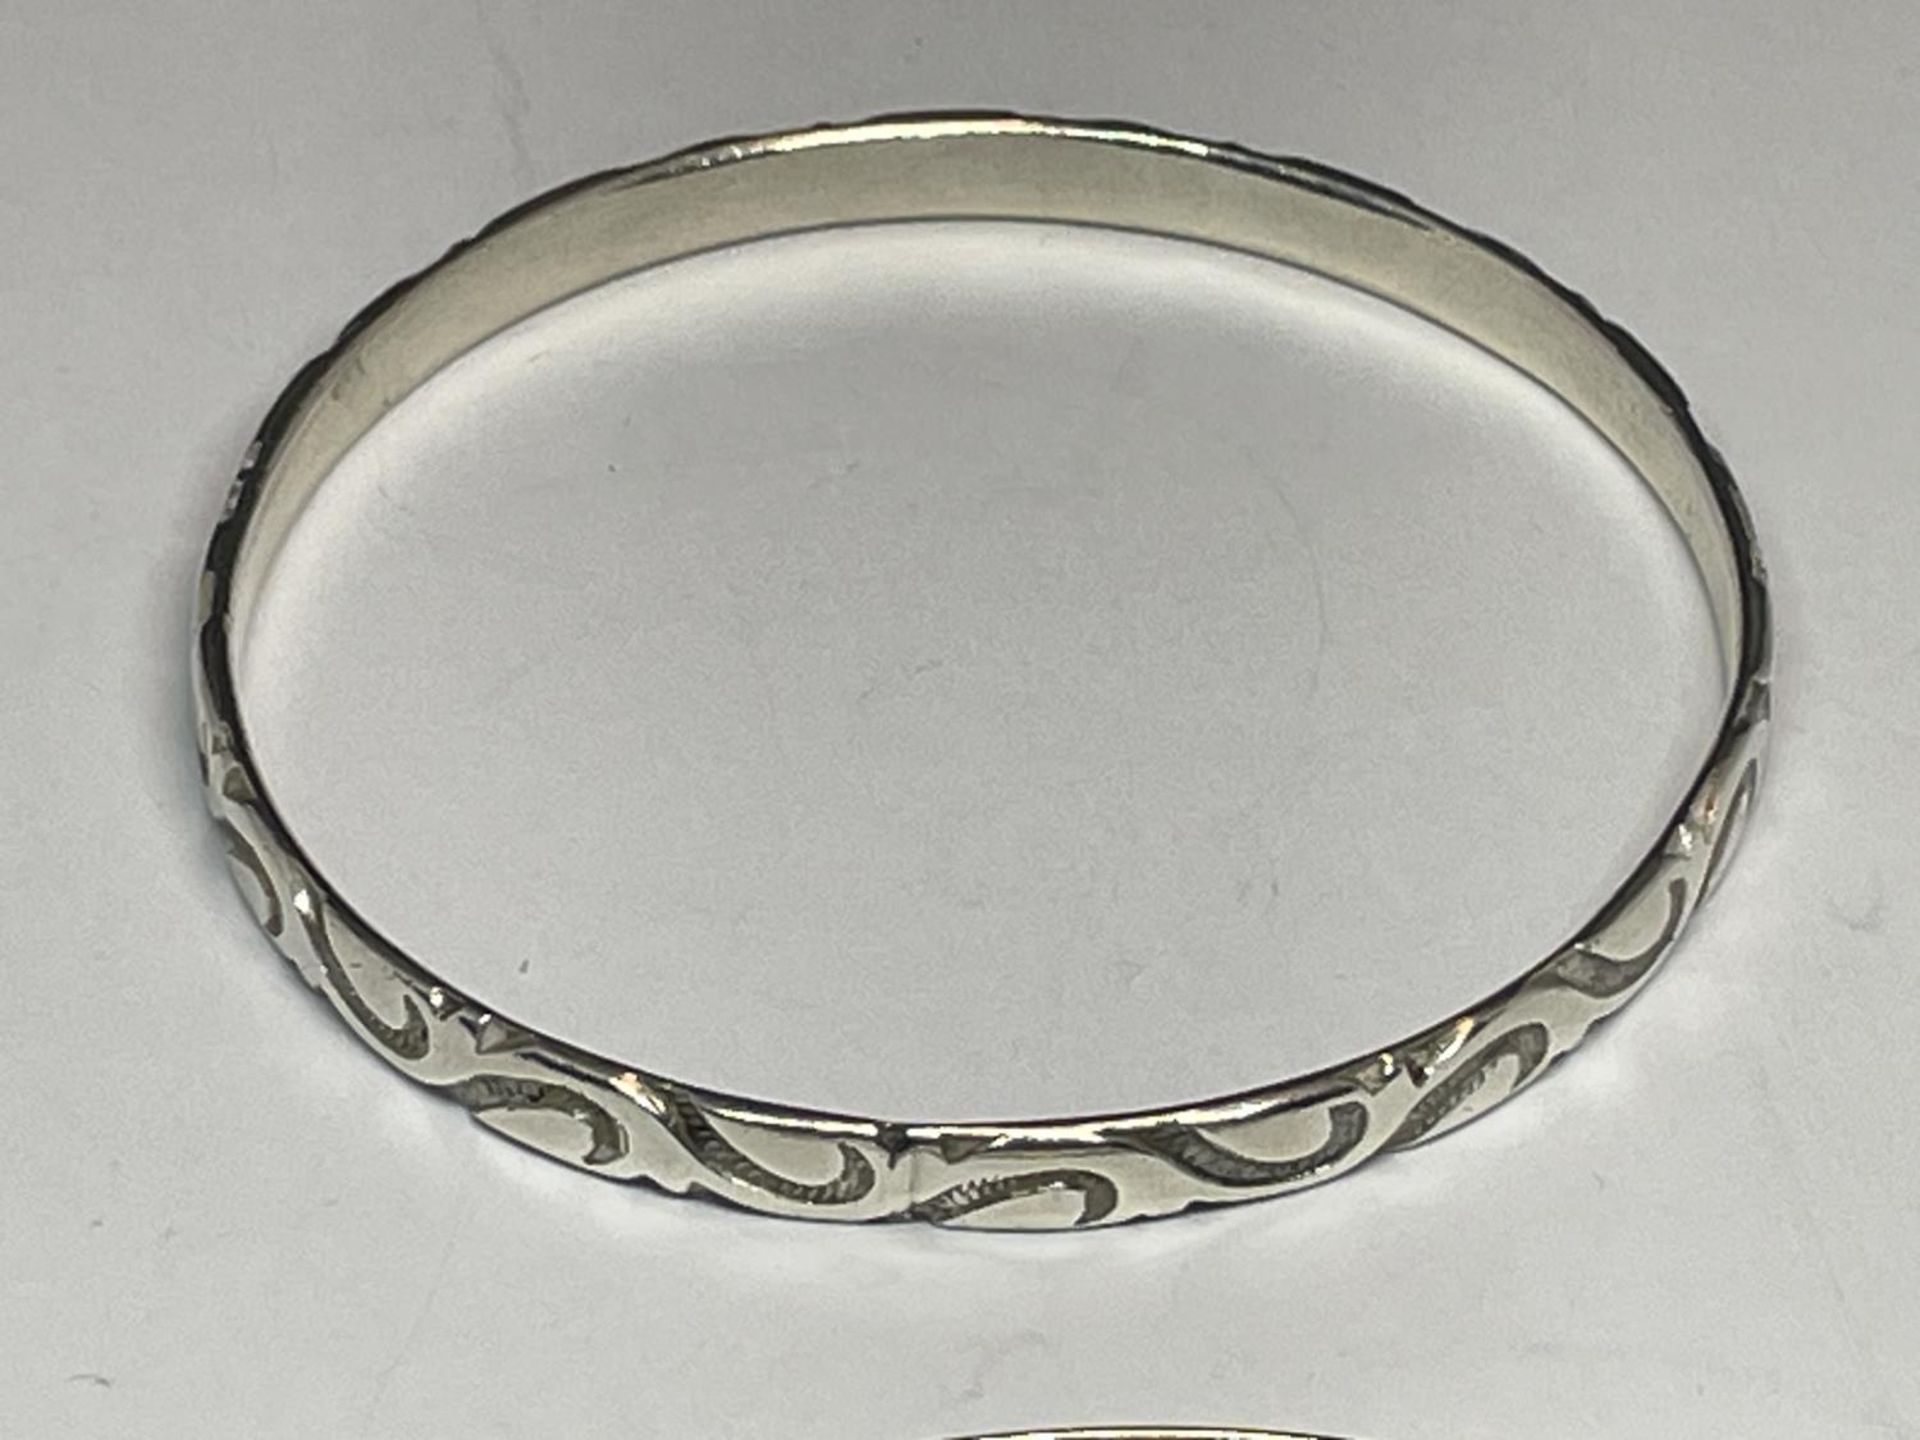 TWO SILVER BANGLES - Image 2 of 3